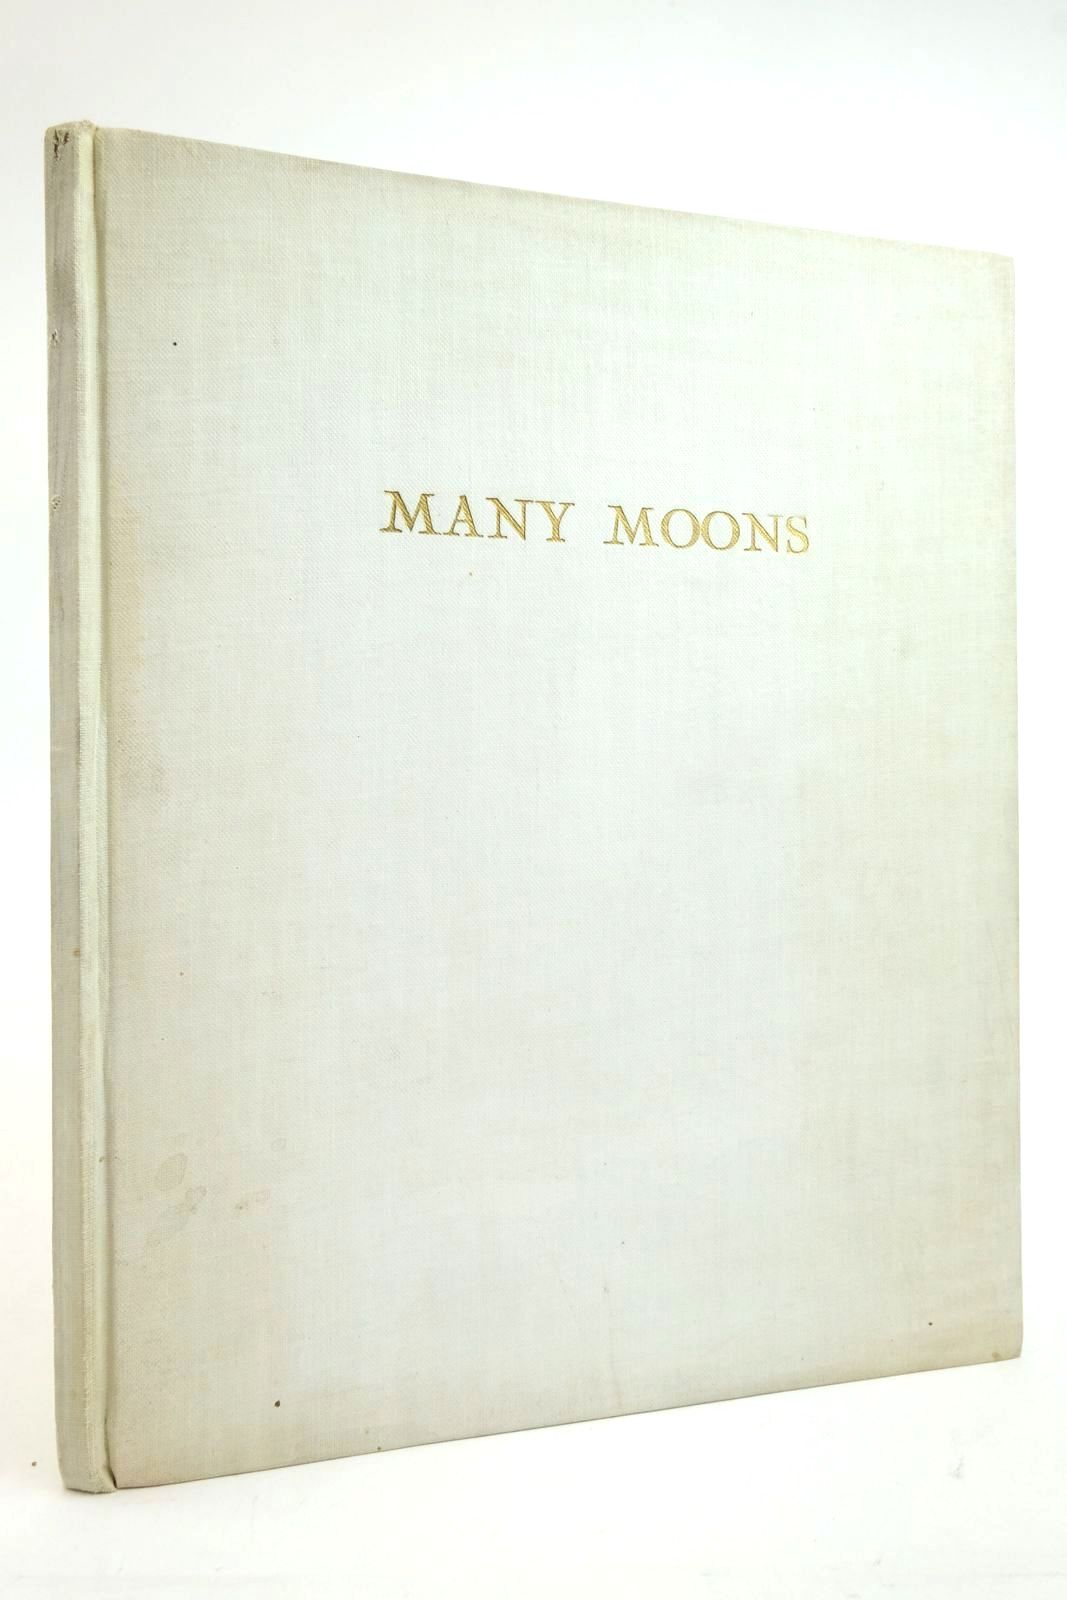 Photo of MANY MOONS- Stock Number: 2136212